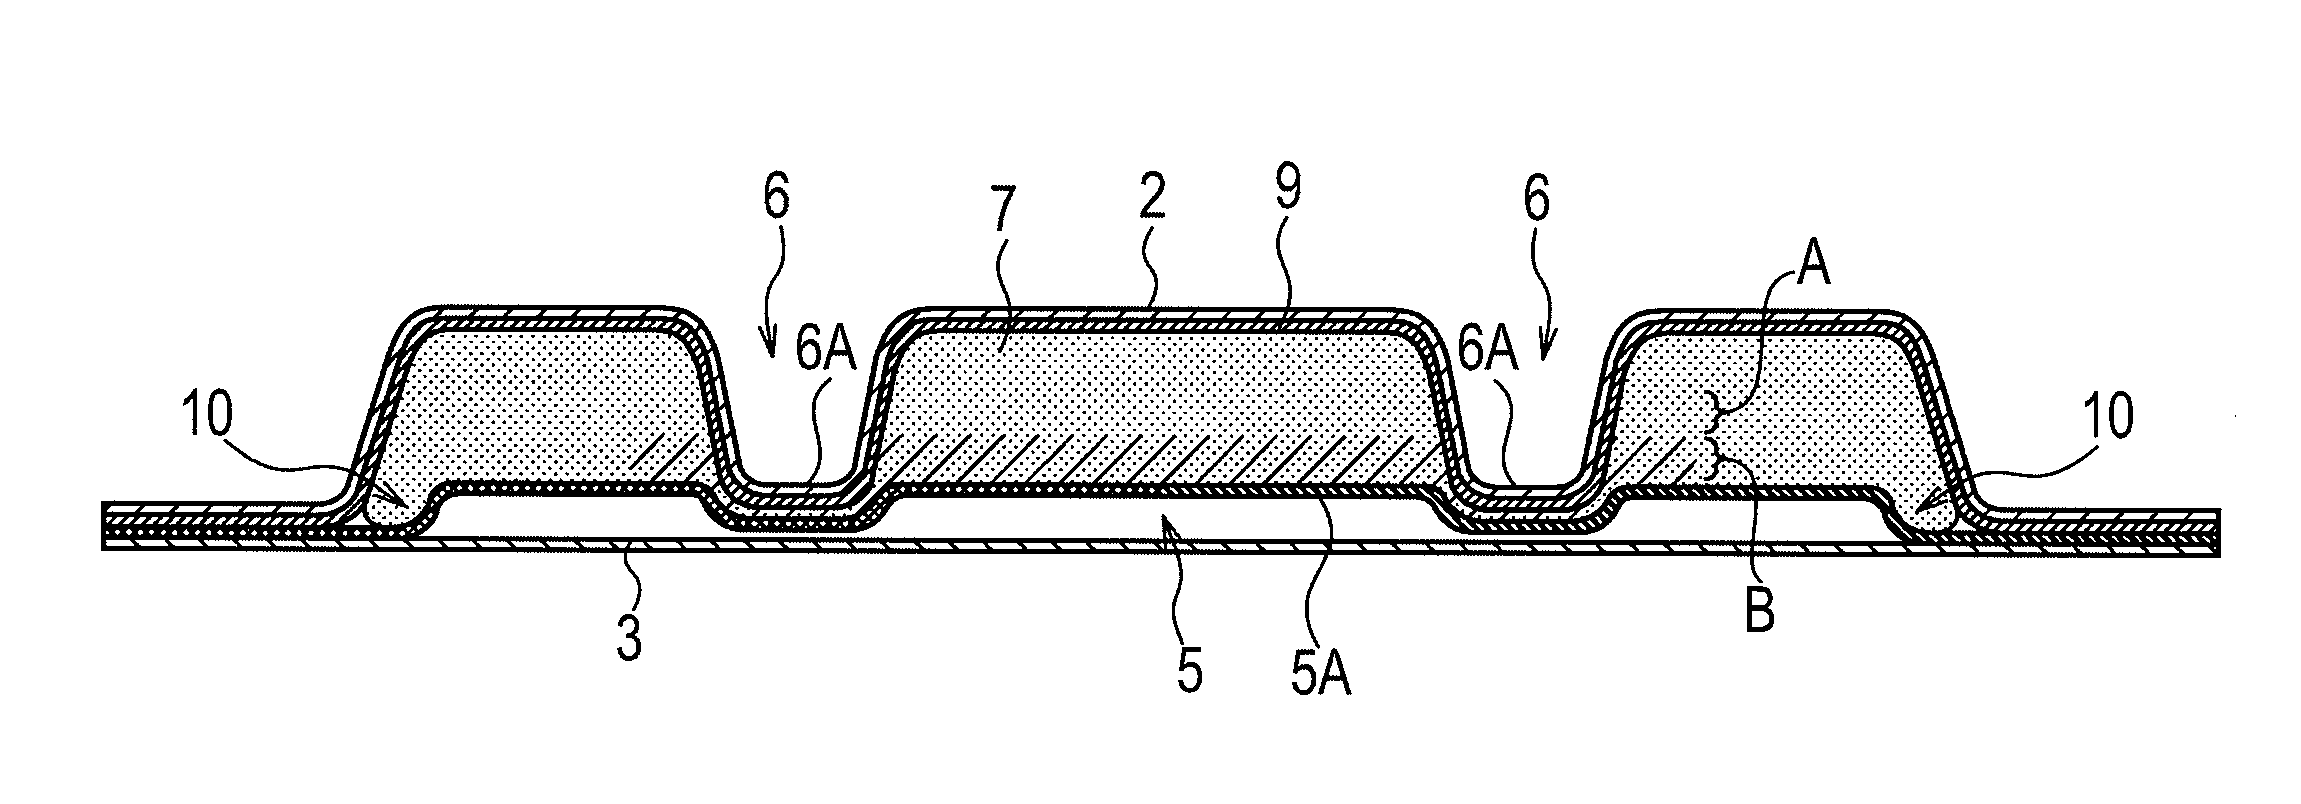 Absorbent article and method of manufacturing the same